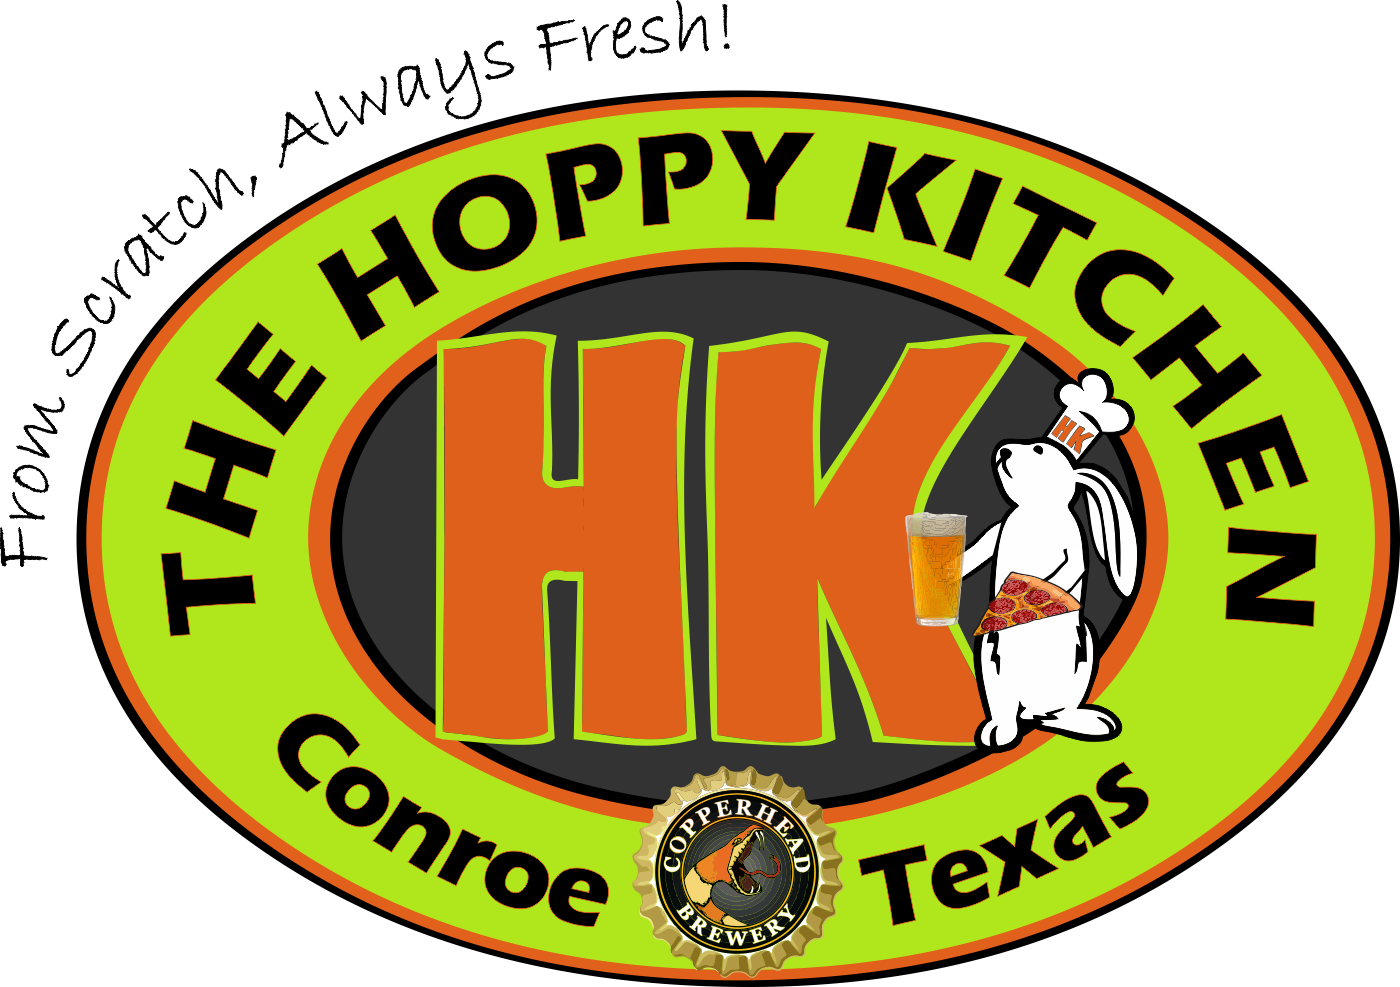 This is the logo for The HOPPY Kitchen